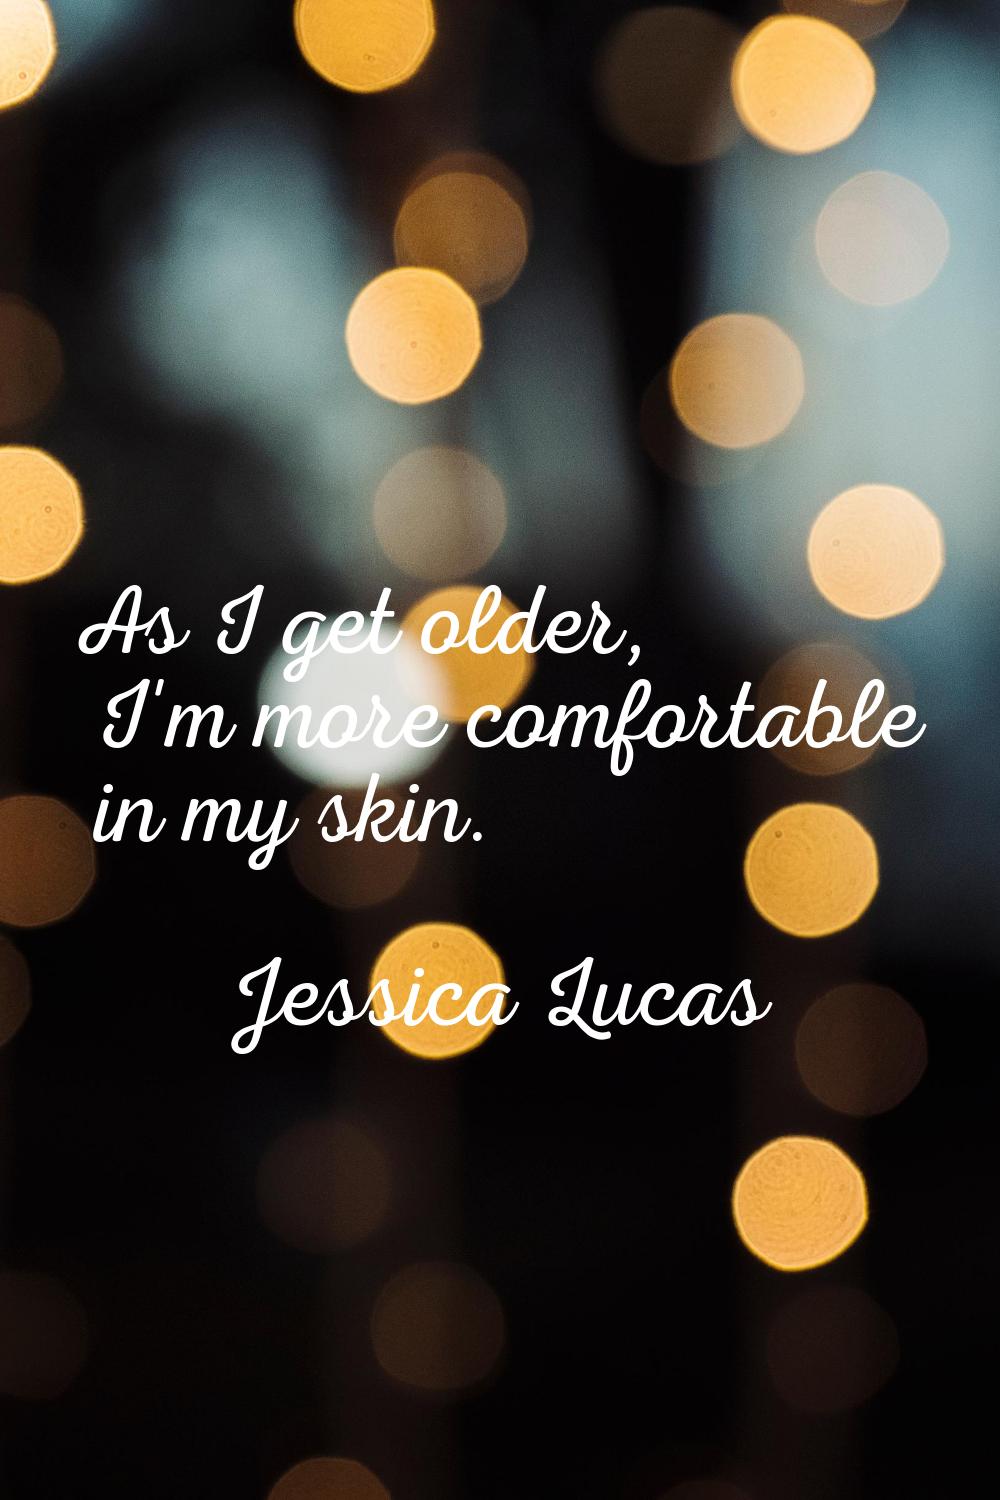 As I get older, I'm more comfortable in my skin.